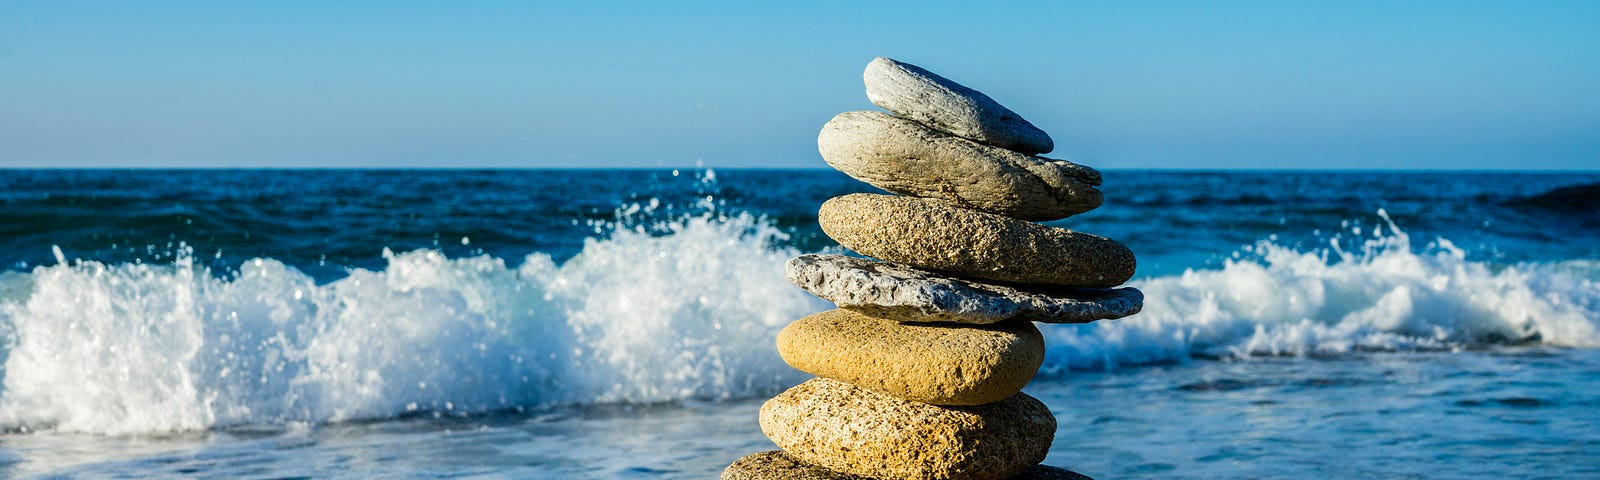 Rock cairn with 8 rocks stacked on sandy beach, with ocean waves in the background. Wave breaking with white surf.